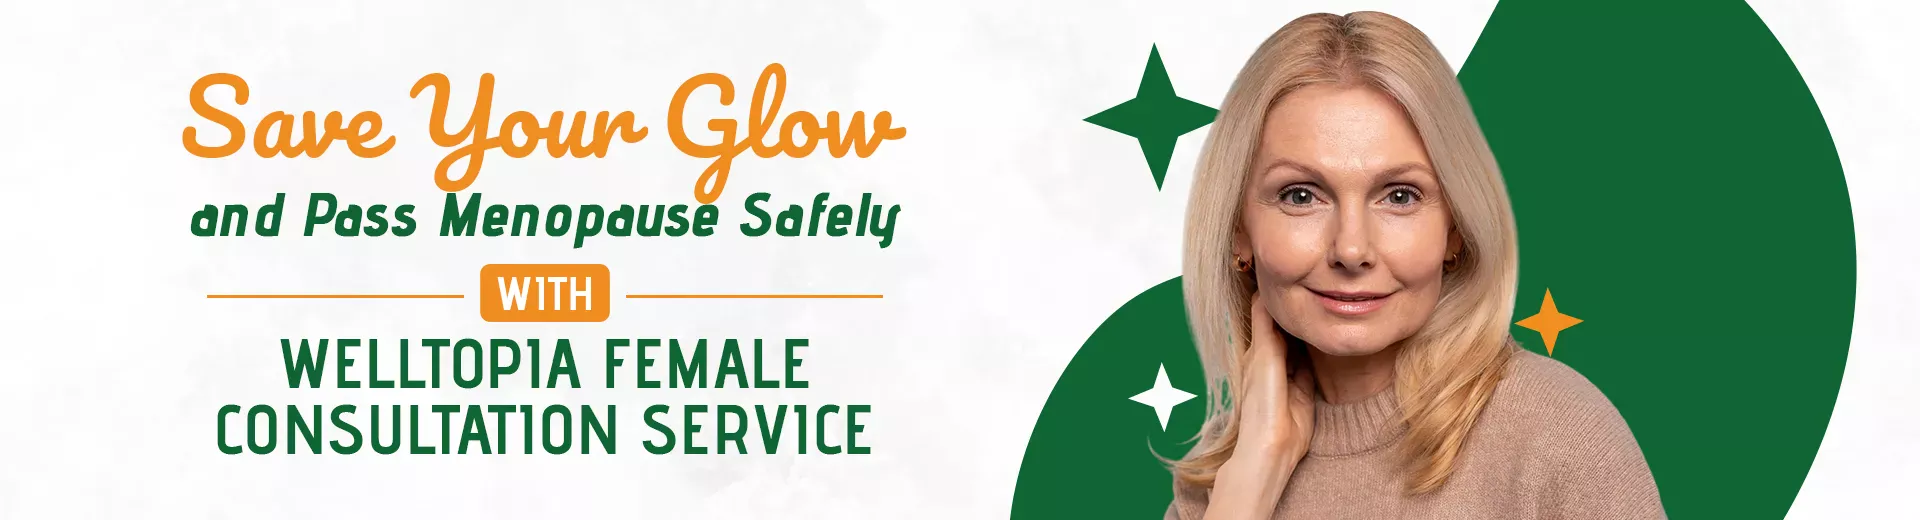 Save Your Glow and Pass Menopause Safely with Welltopia Female Consultation Service-m